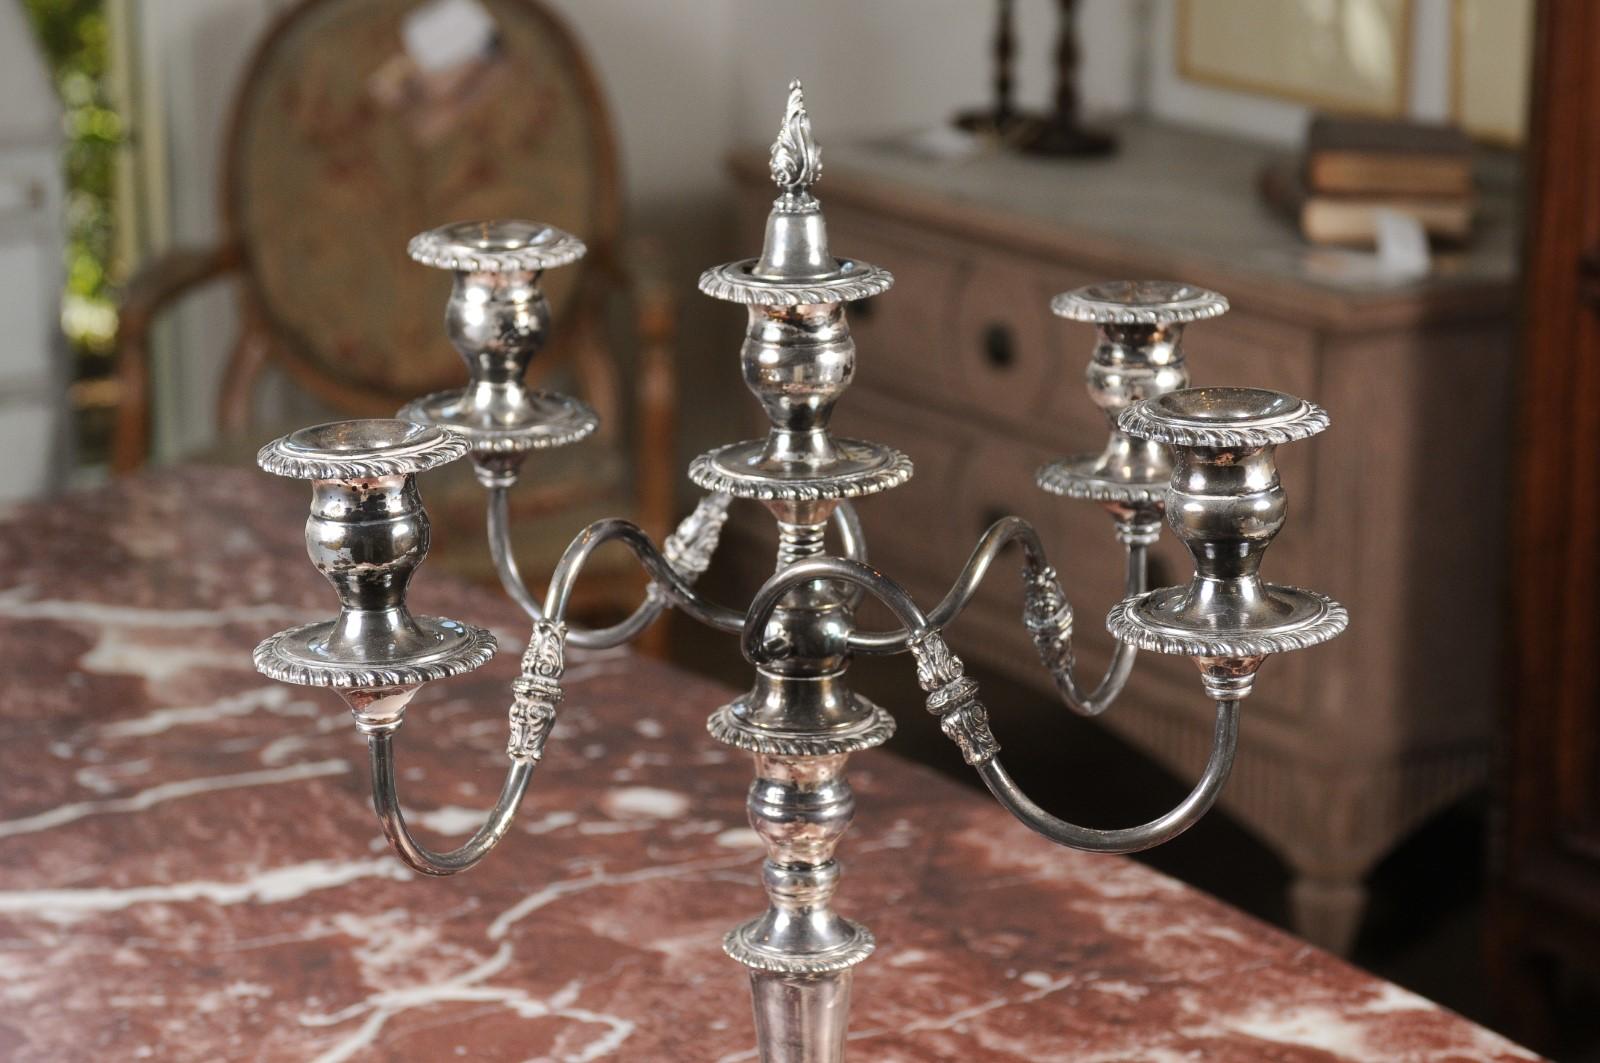 20th Century American Silver Plated Four-Arm Candelabra with Foliage and Scrolling Accents